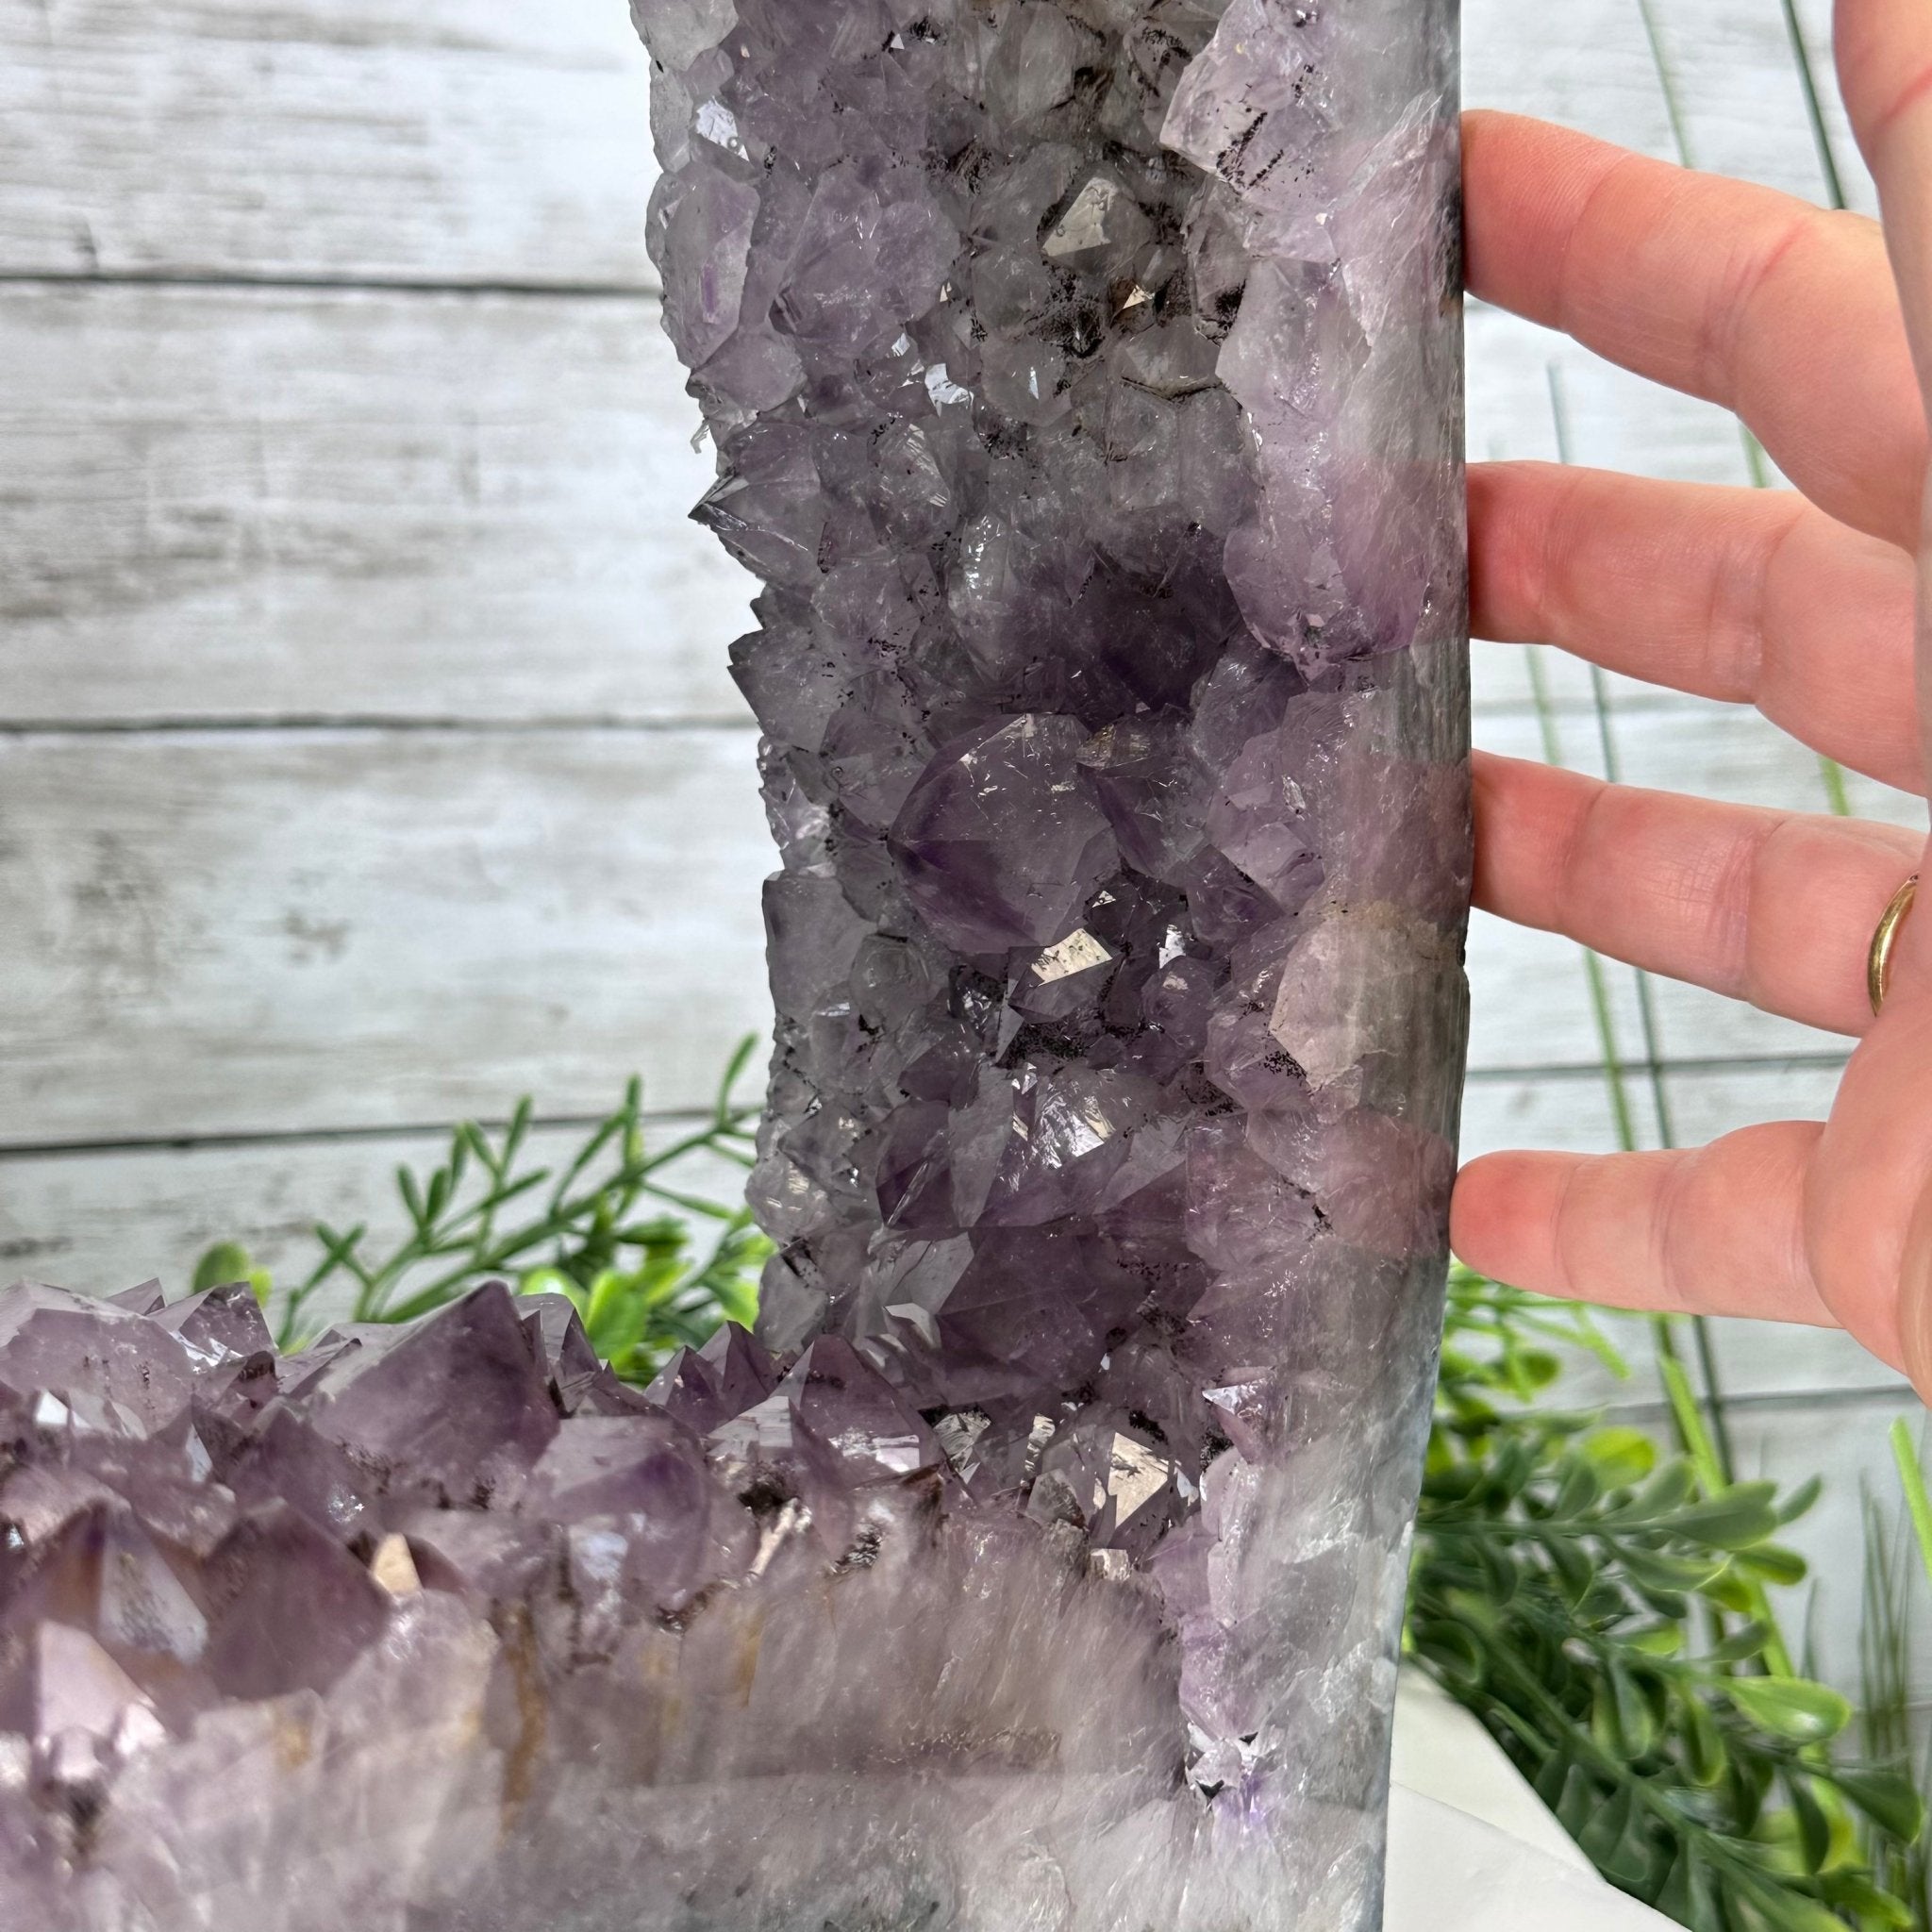 Standard Plus Quality Open 2-Sided Brazilian Amethyst Cathedral, 25.7 lbs, 17.25" tall, Model #5605-0130 by Brazil Gems - Brazil GemsBrazil GemsStandard Plus Quality Open 2-Sided Brazilian Amethyst Cathedral, 25.7 lbs, 17.25" tall, Model #5605-0130 by Brazil GemsOpen 2-Sided Cathedrals5605-0130